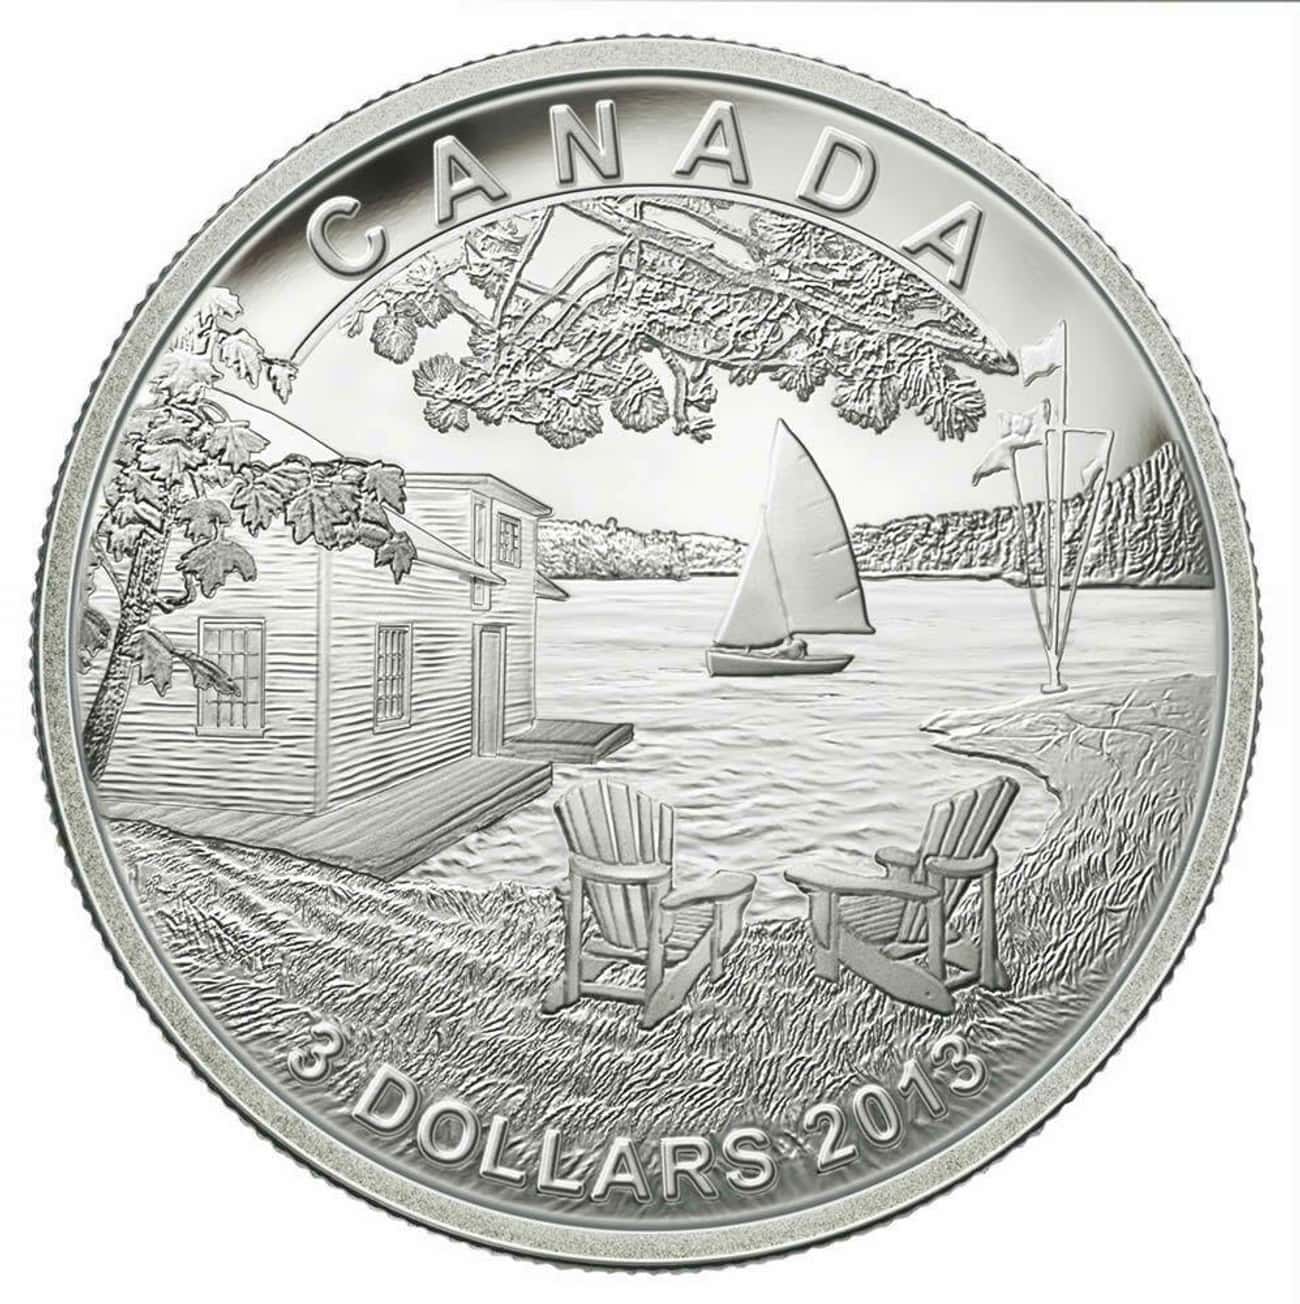 Canada Minted A Coin In Short's Honor